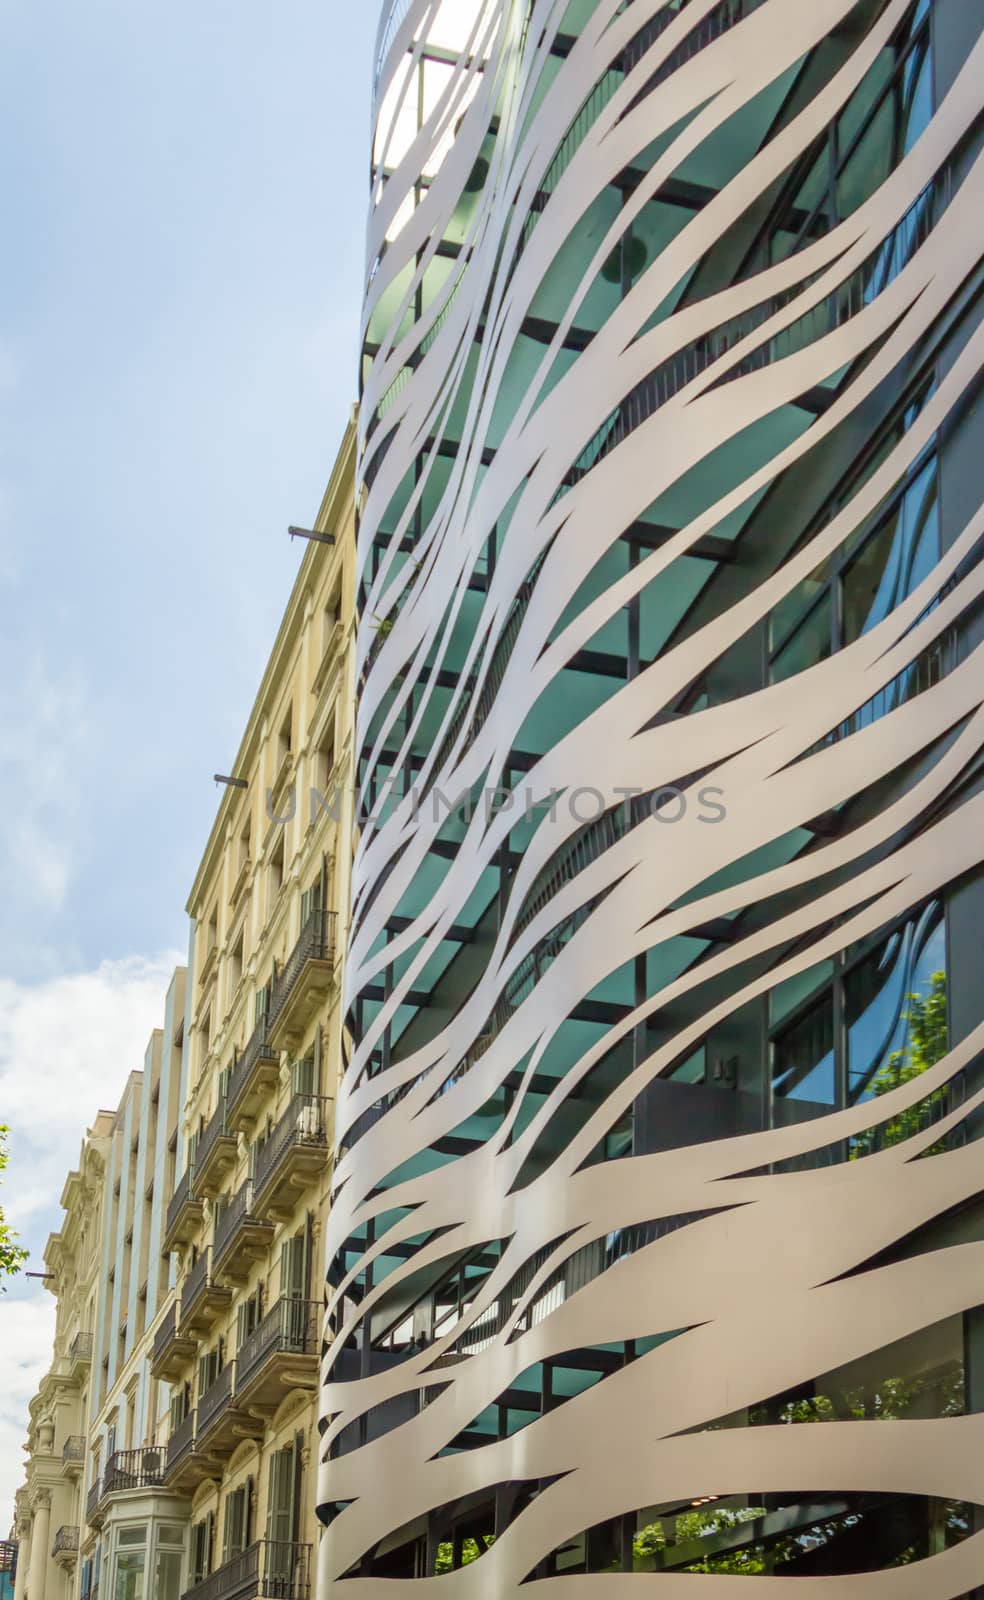 Facade of modern building with waves forms by doble.d